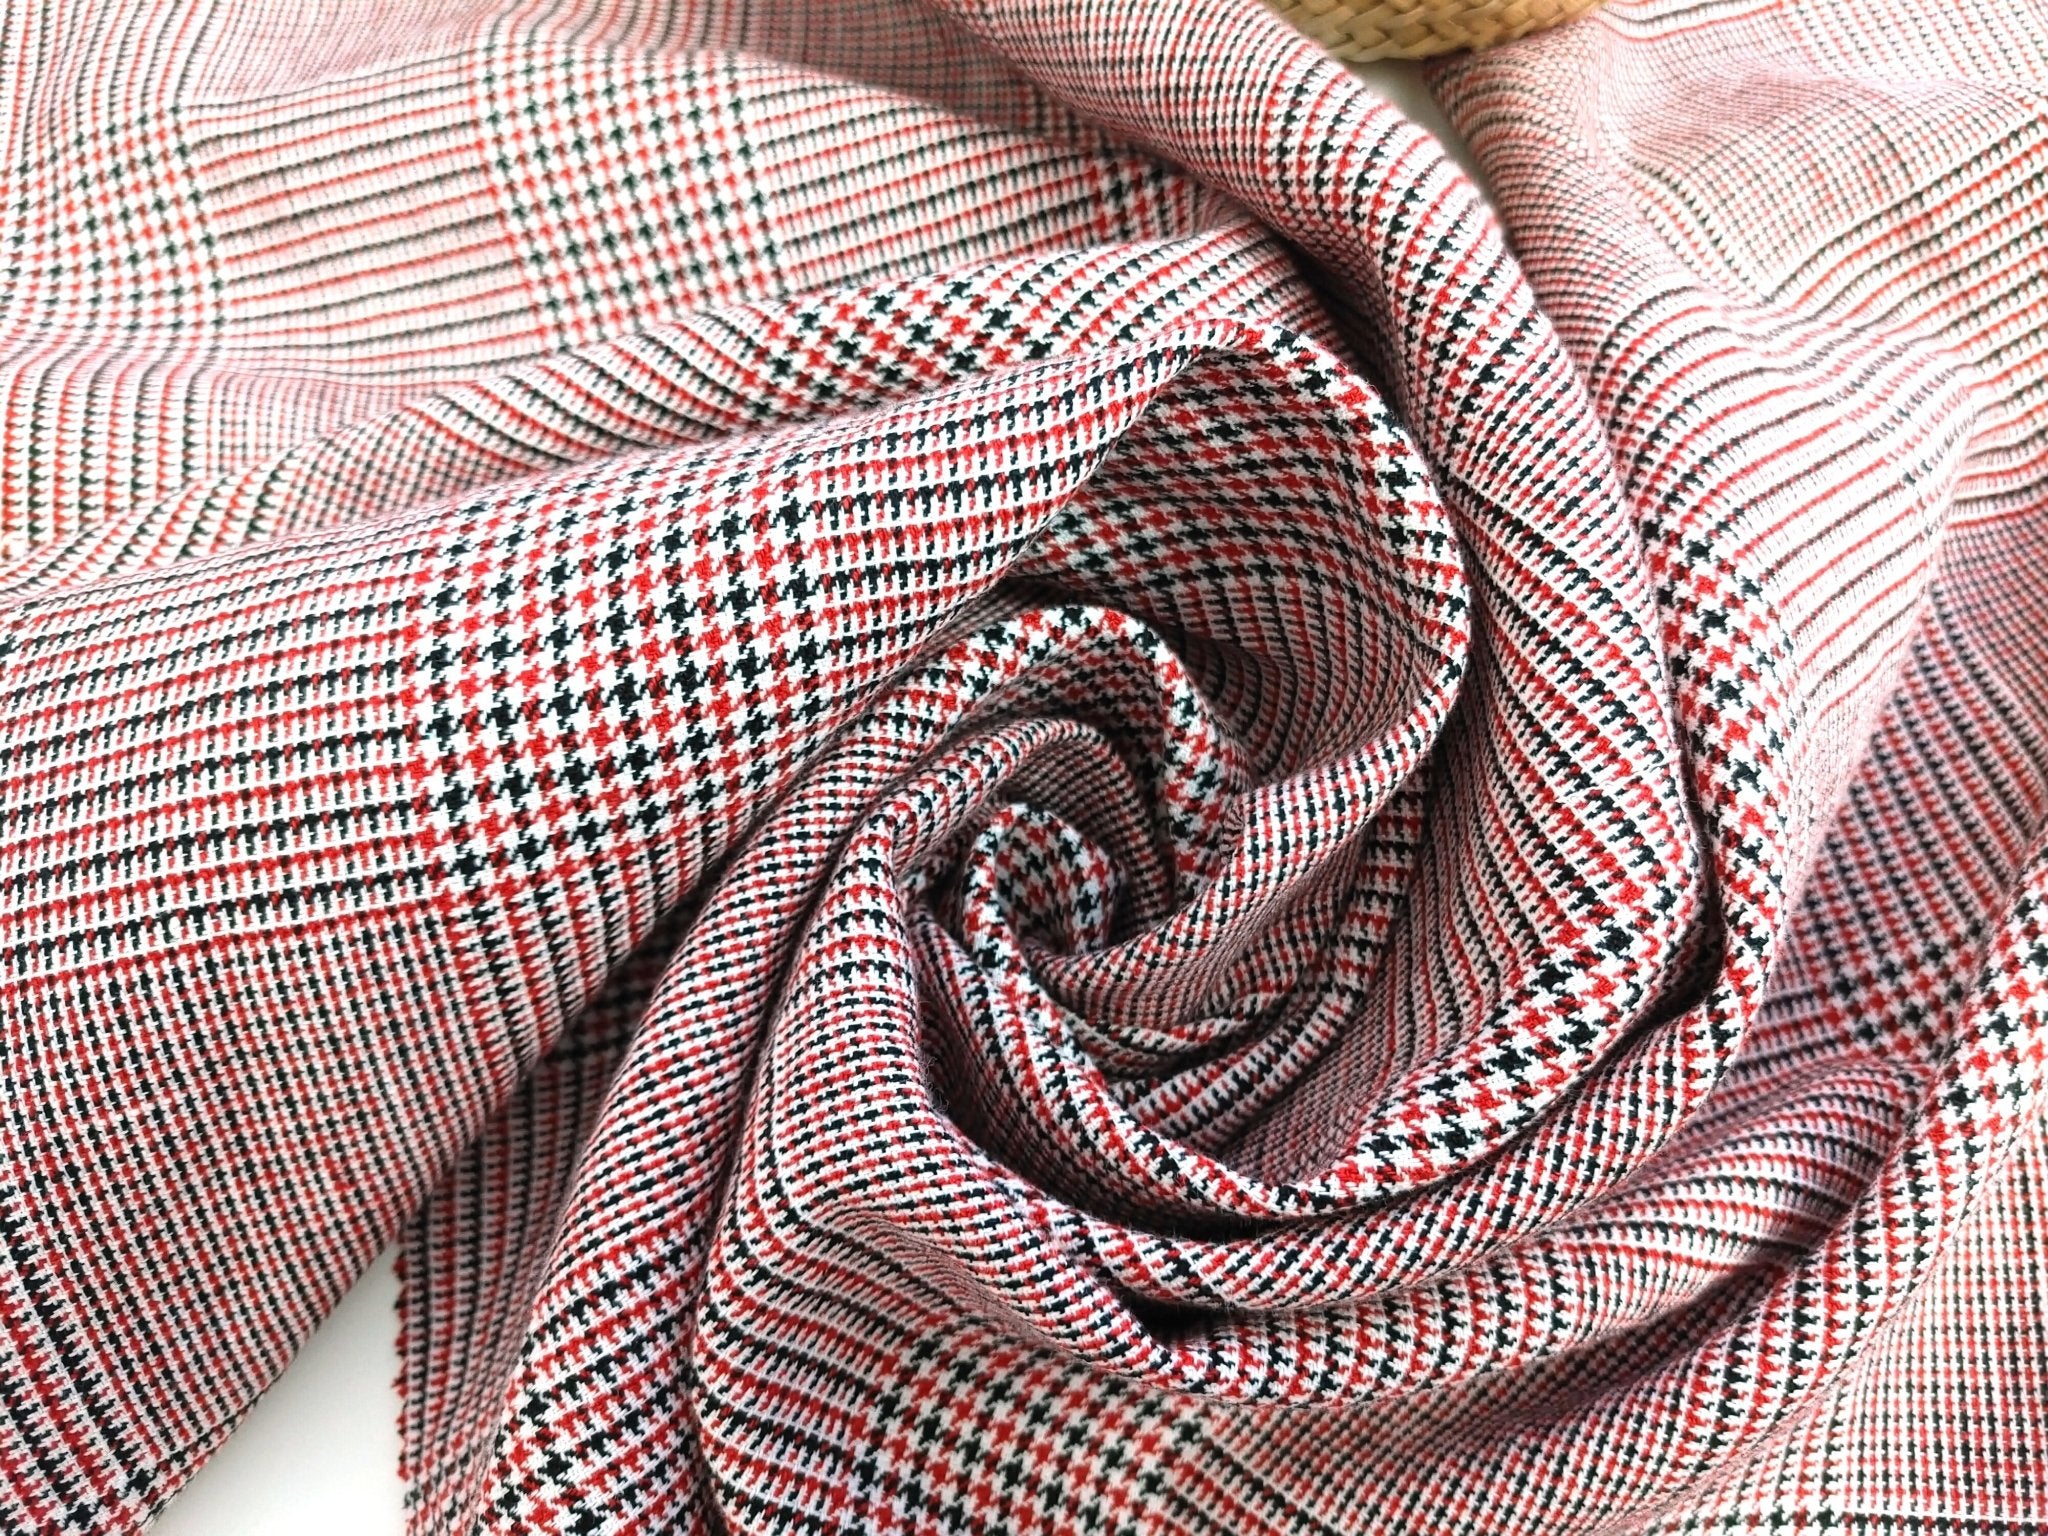 Tricolor Symphony: Linen Cotton Twill Glen Plaid in Medium Weight – White, Red, and Black 6759 - The Linen Lab - Red